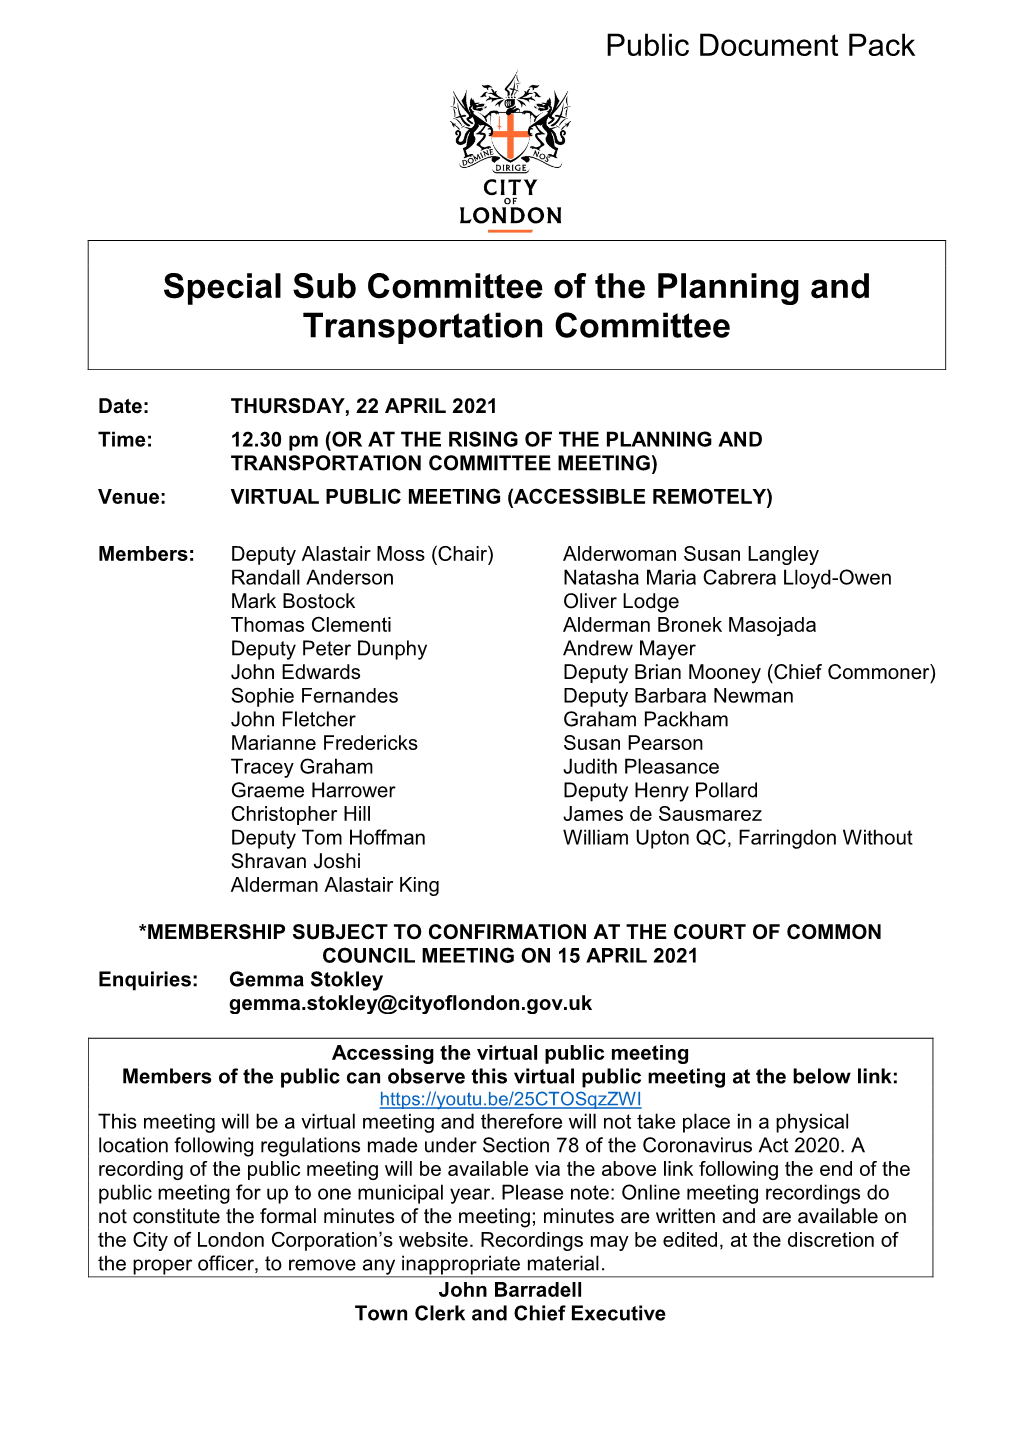 (Public Pack)Agenda Document for Special Sub Committee of The